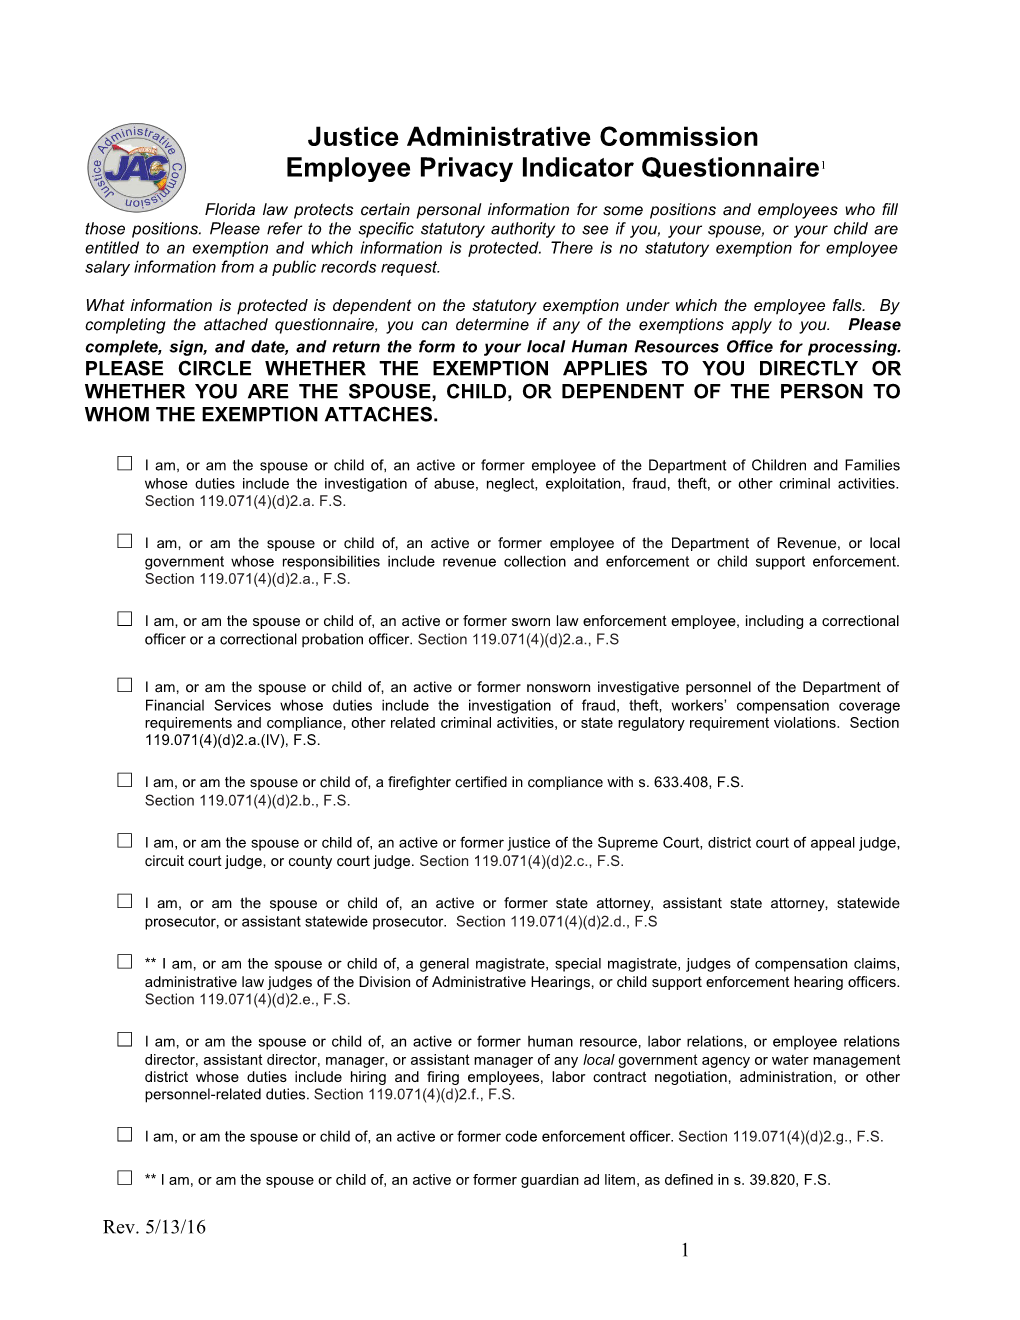 Employee Privacy Indicator Questionnaire *